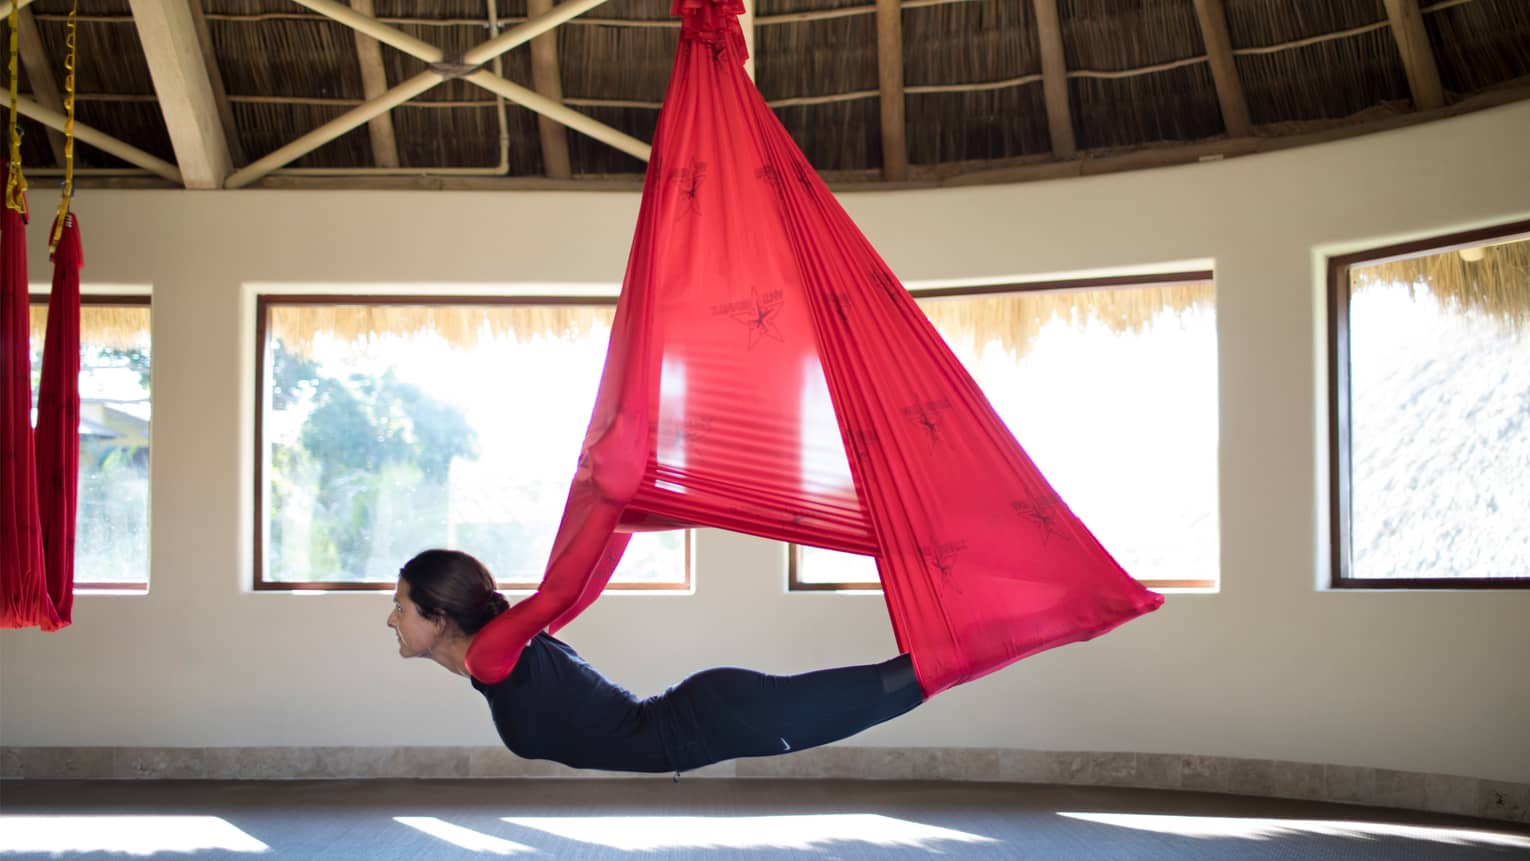 Woman hovers above ground, hanging from red fabric in anti-gravity yoga pose under thatched roof